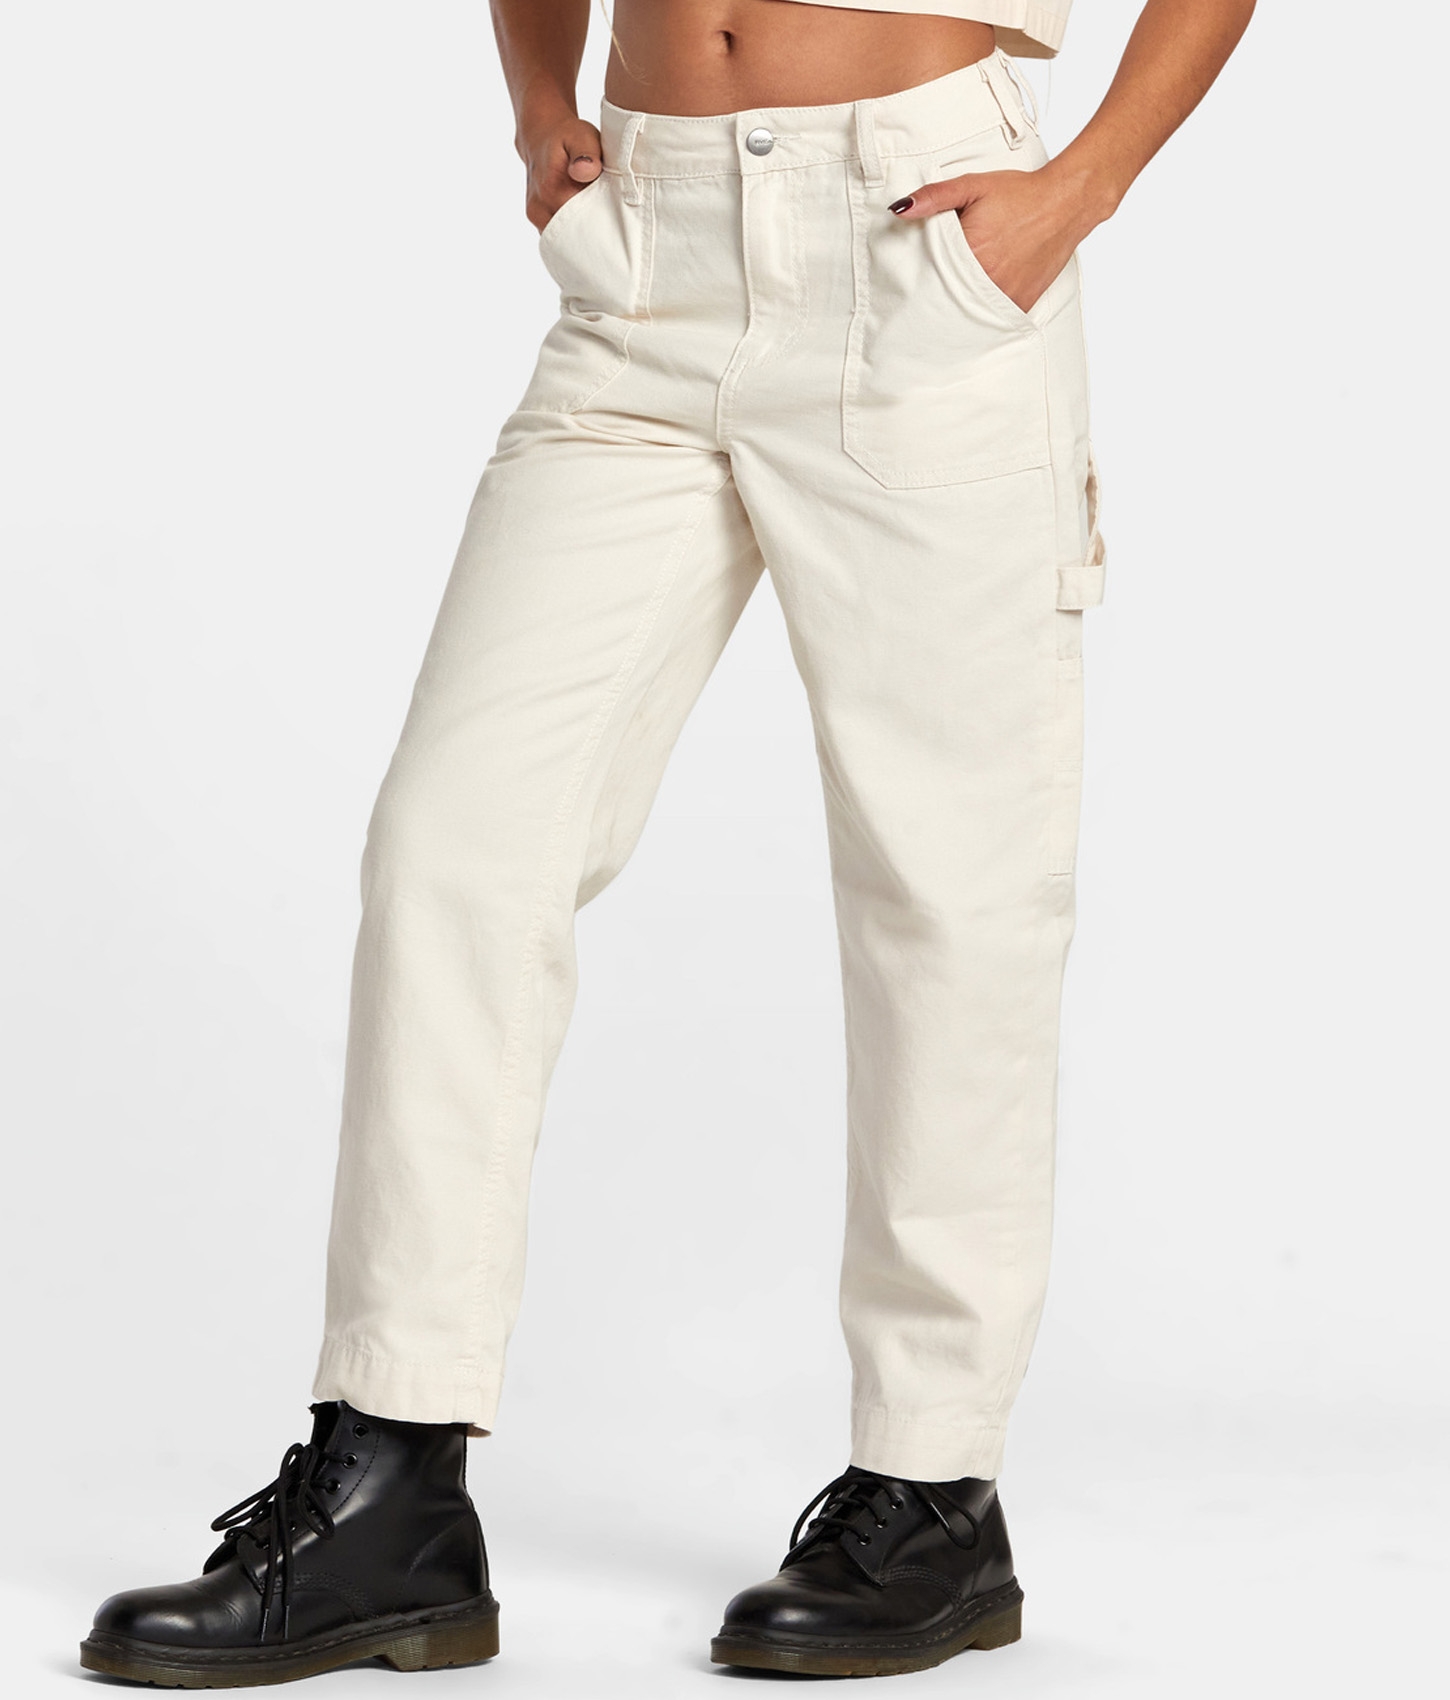 Recession Workwear Pant